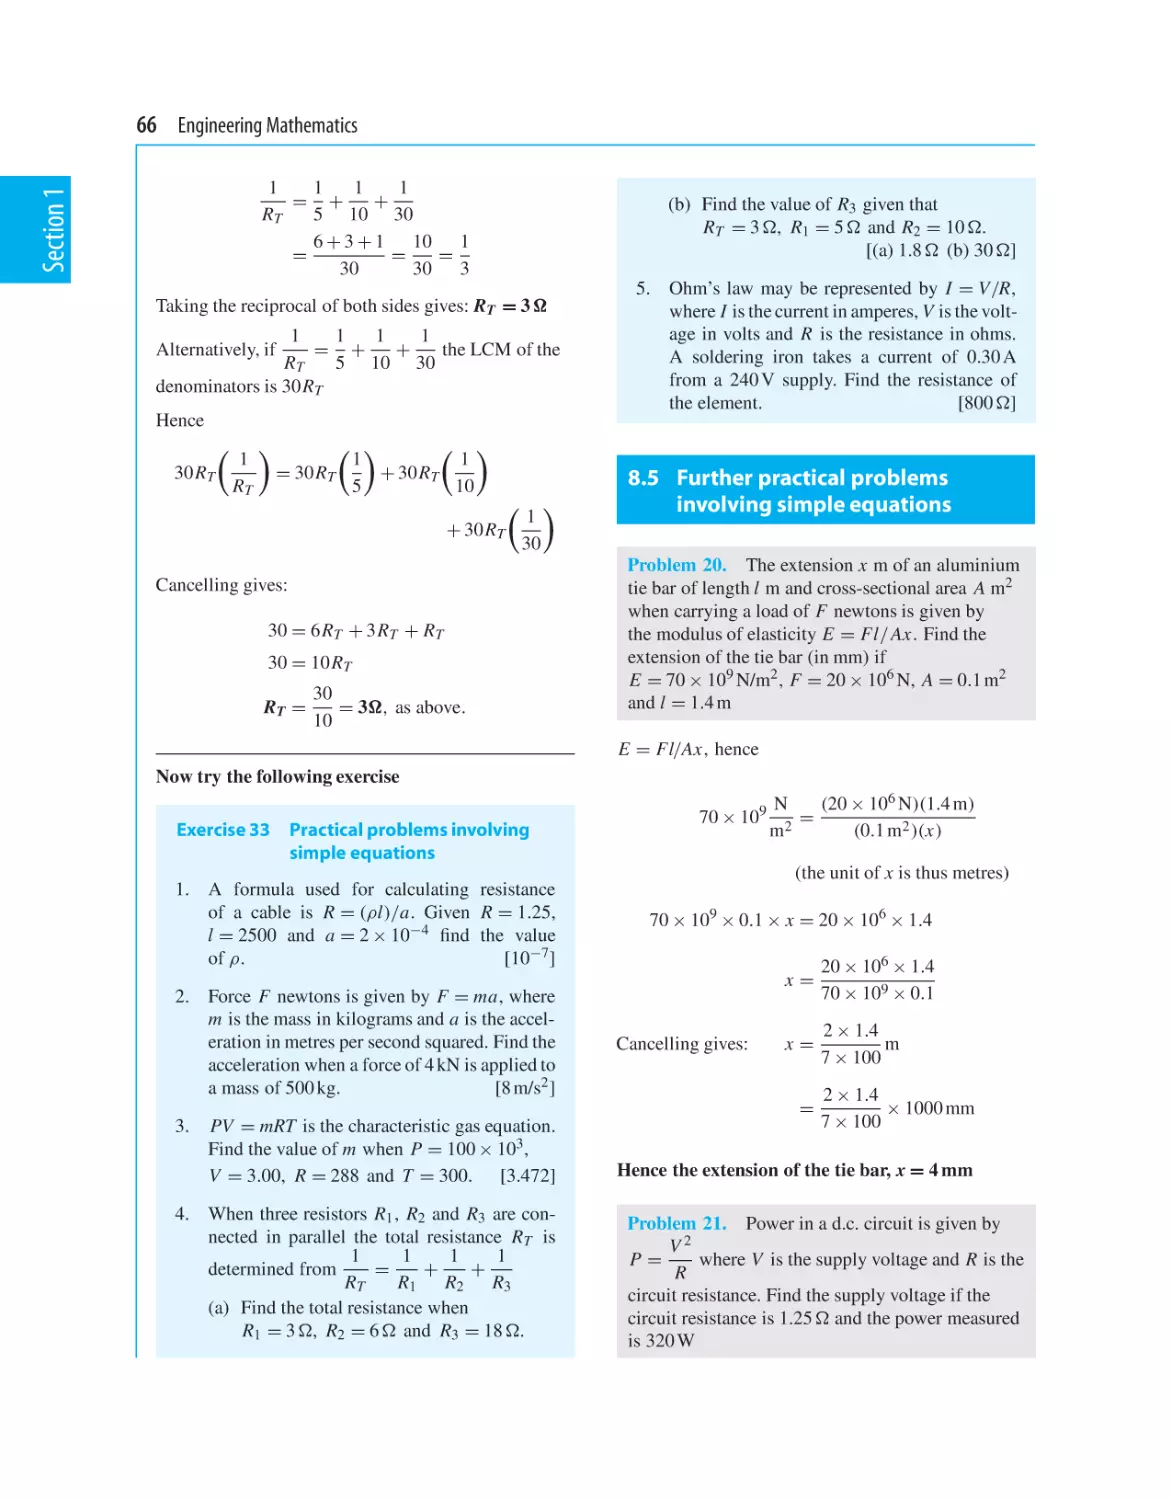 8.5 Further practical problems involving simple equations